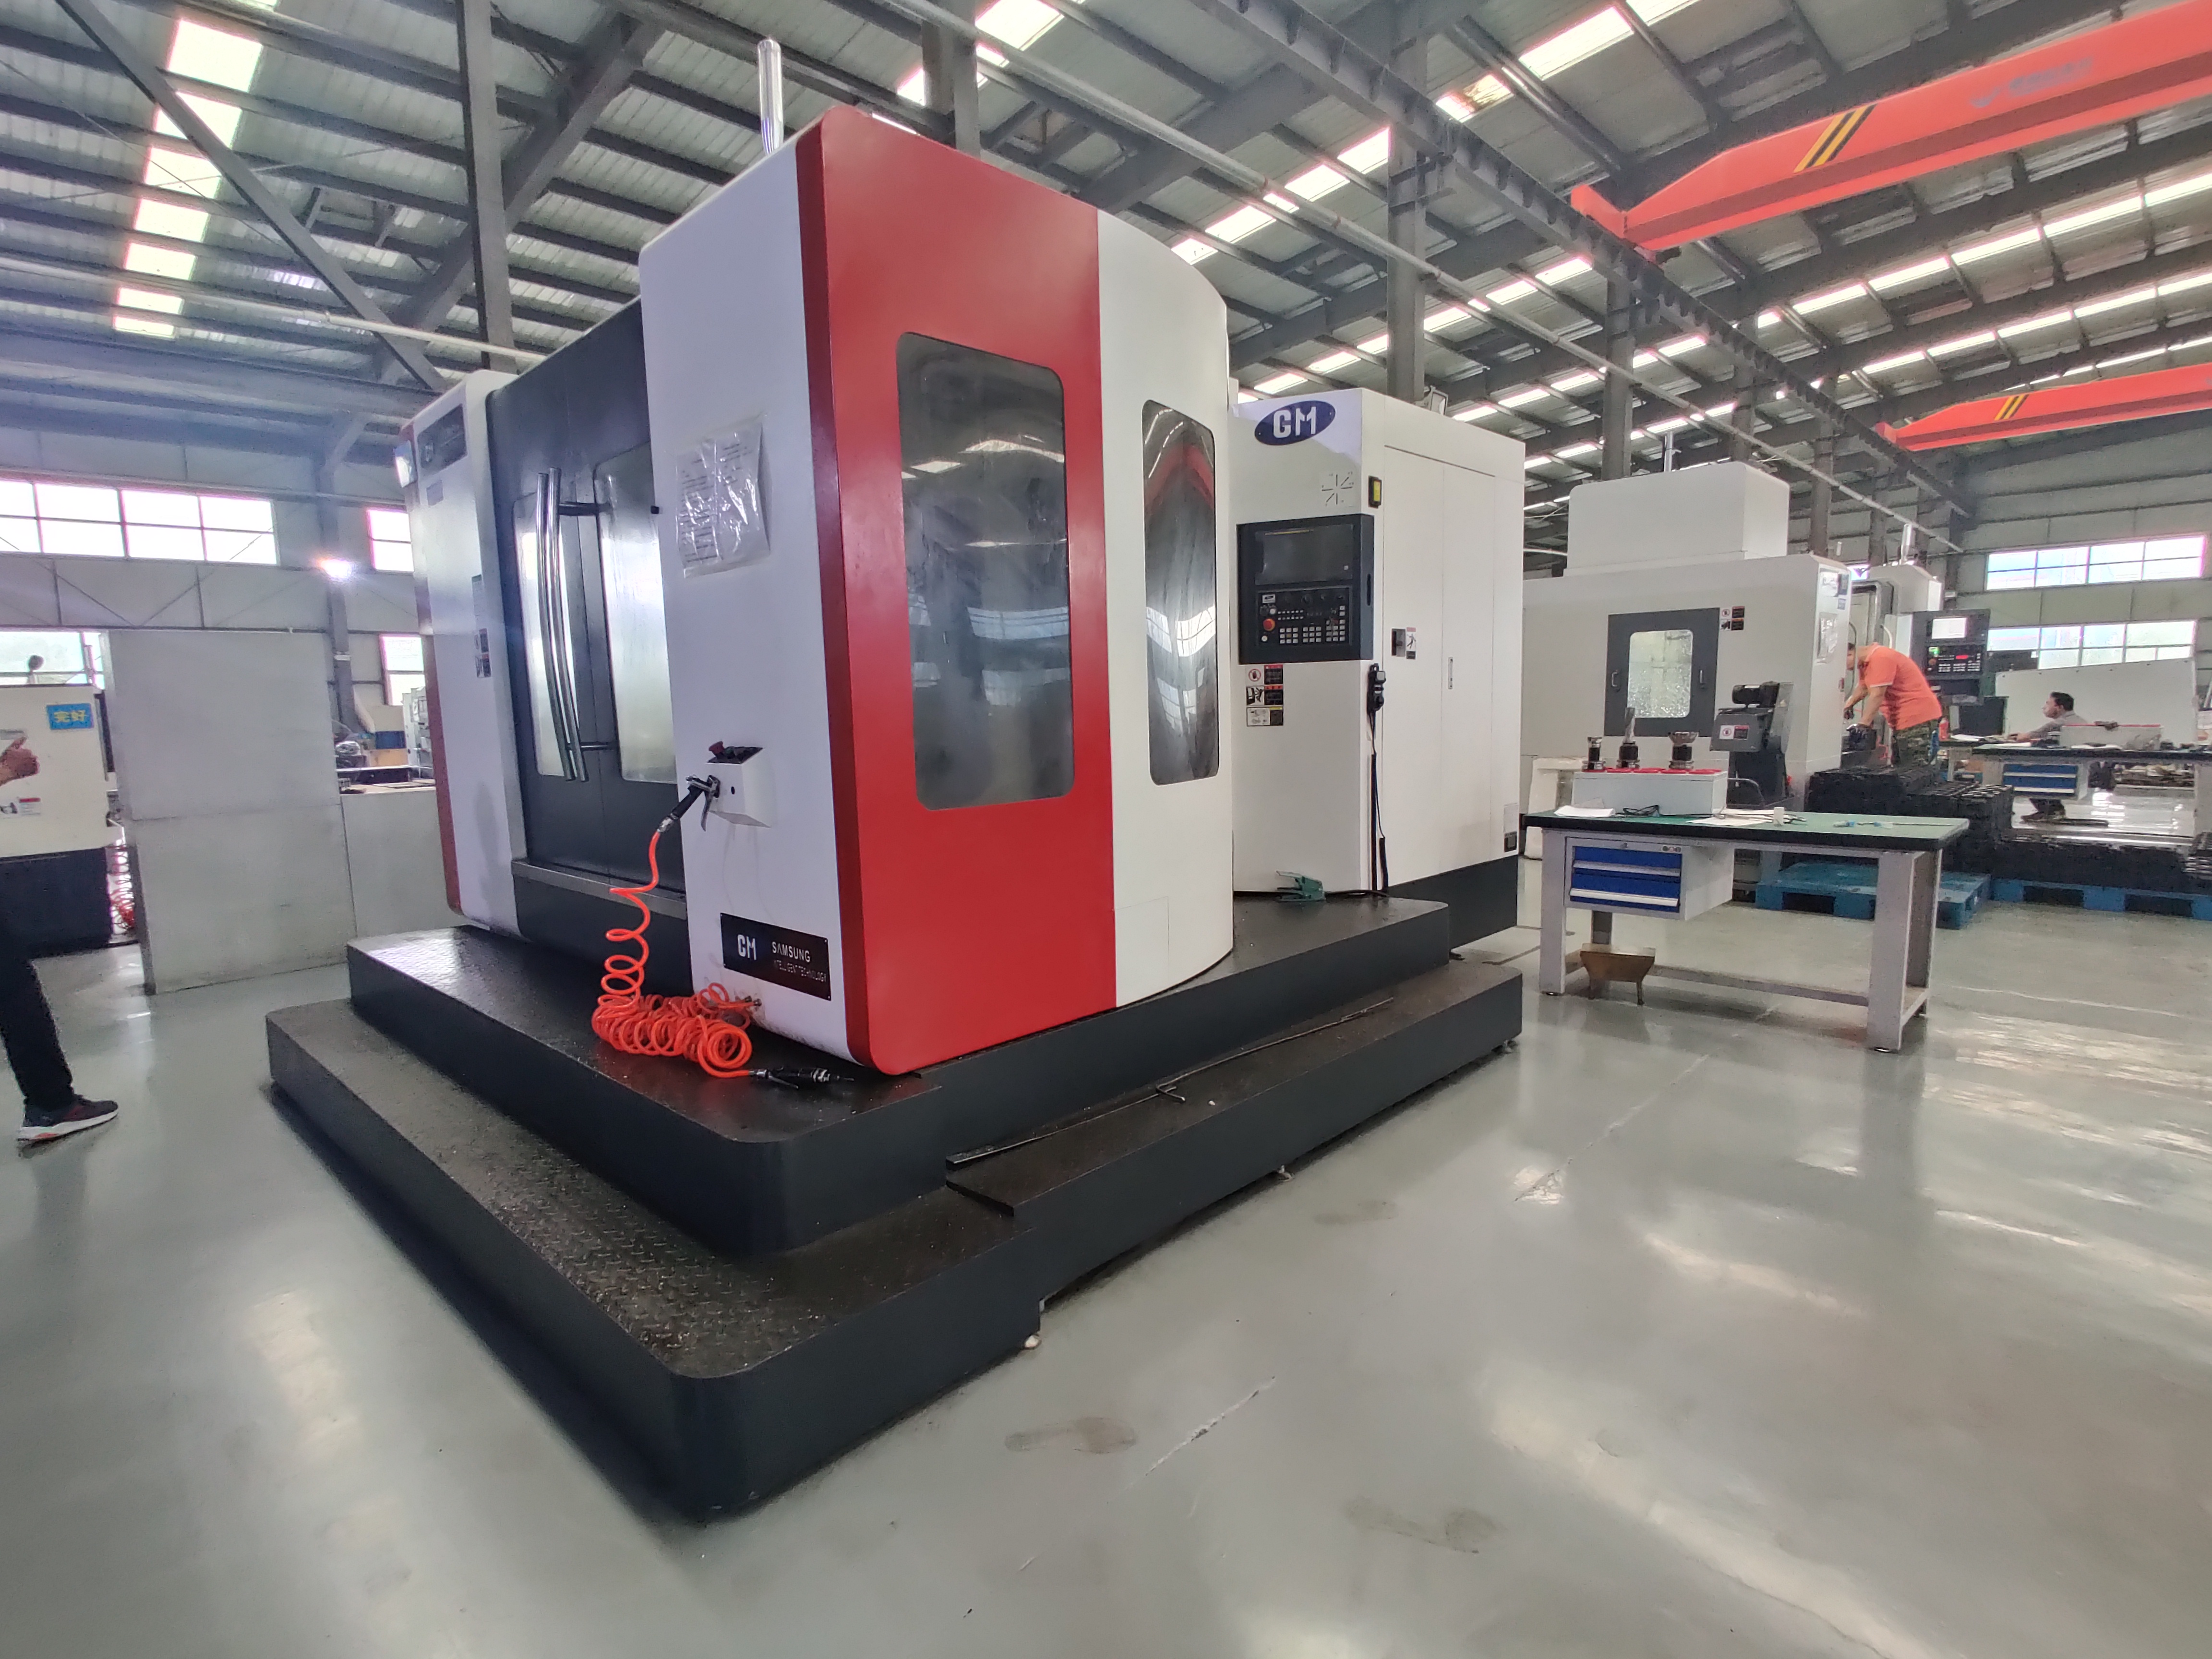 What can a four axis CNC machining center do?